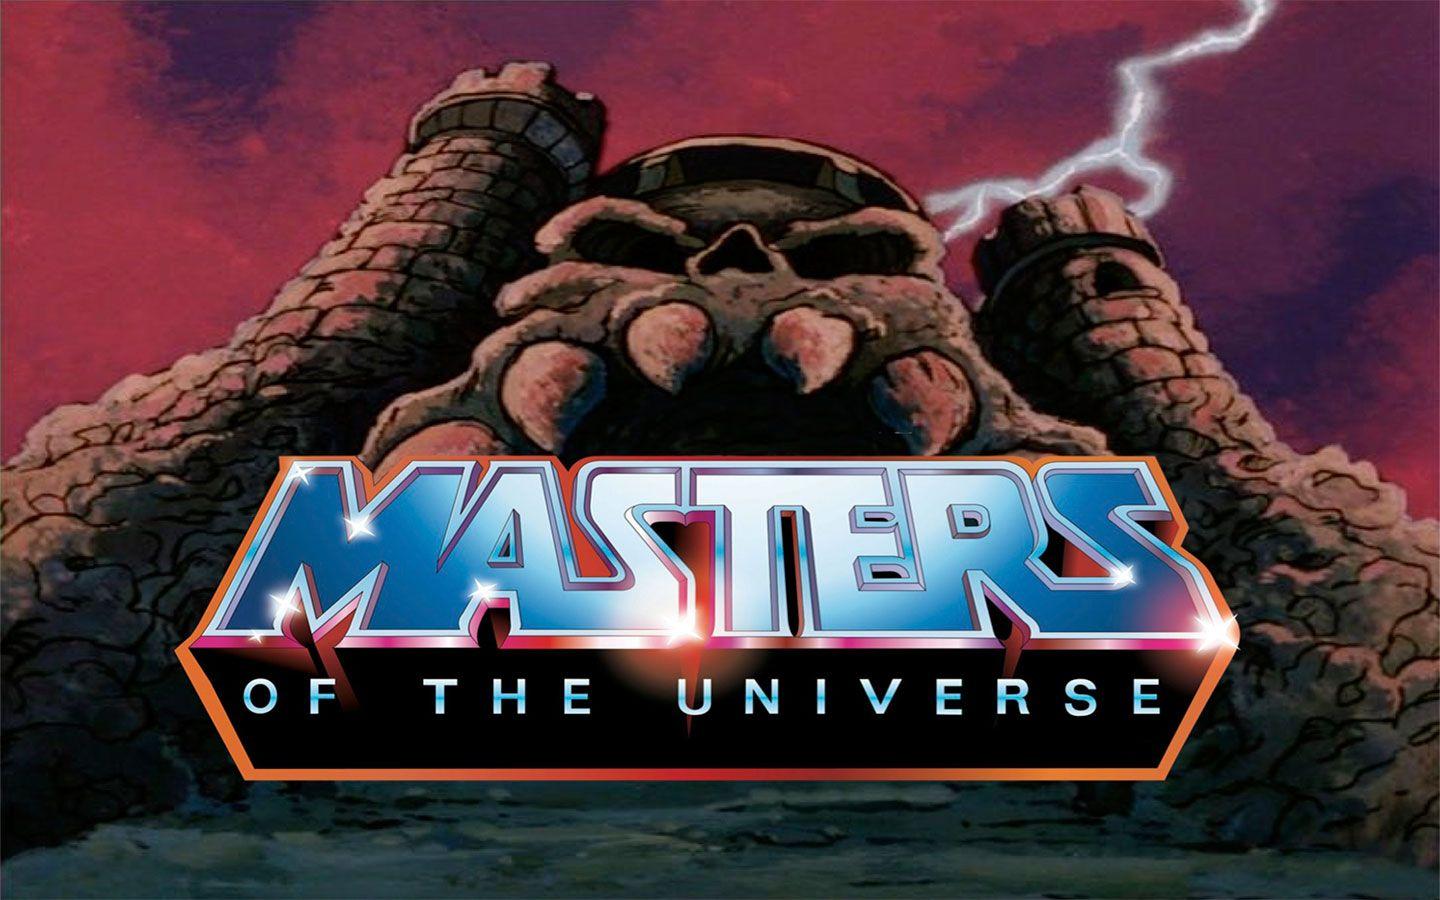 He Man And The Masters Of The Universe Image